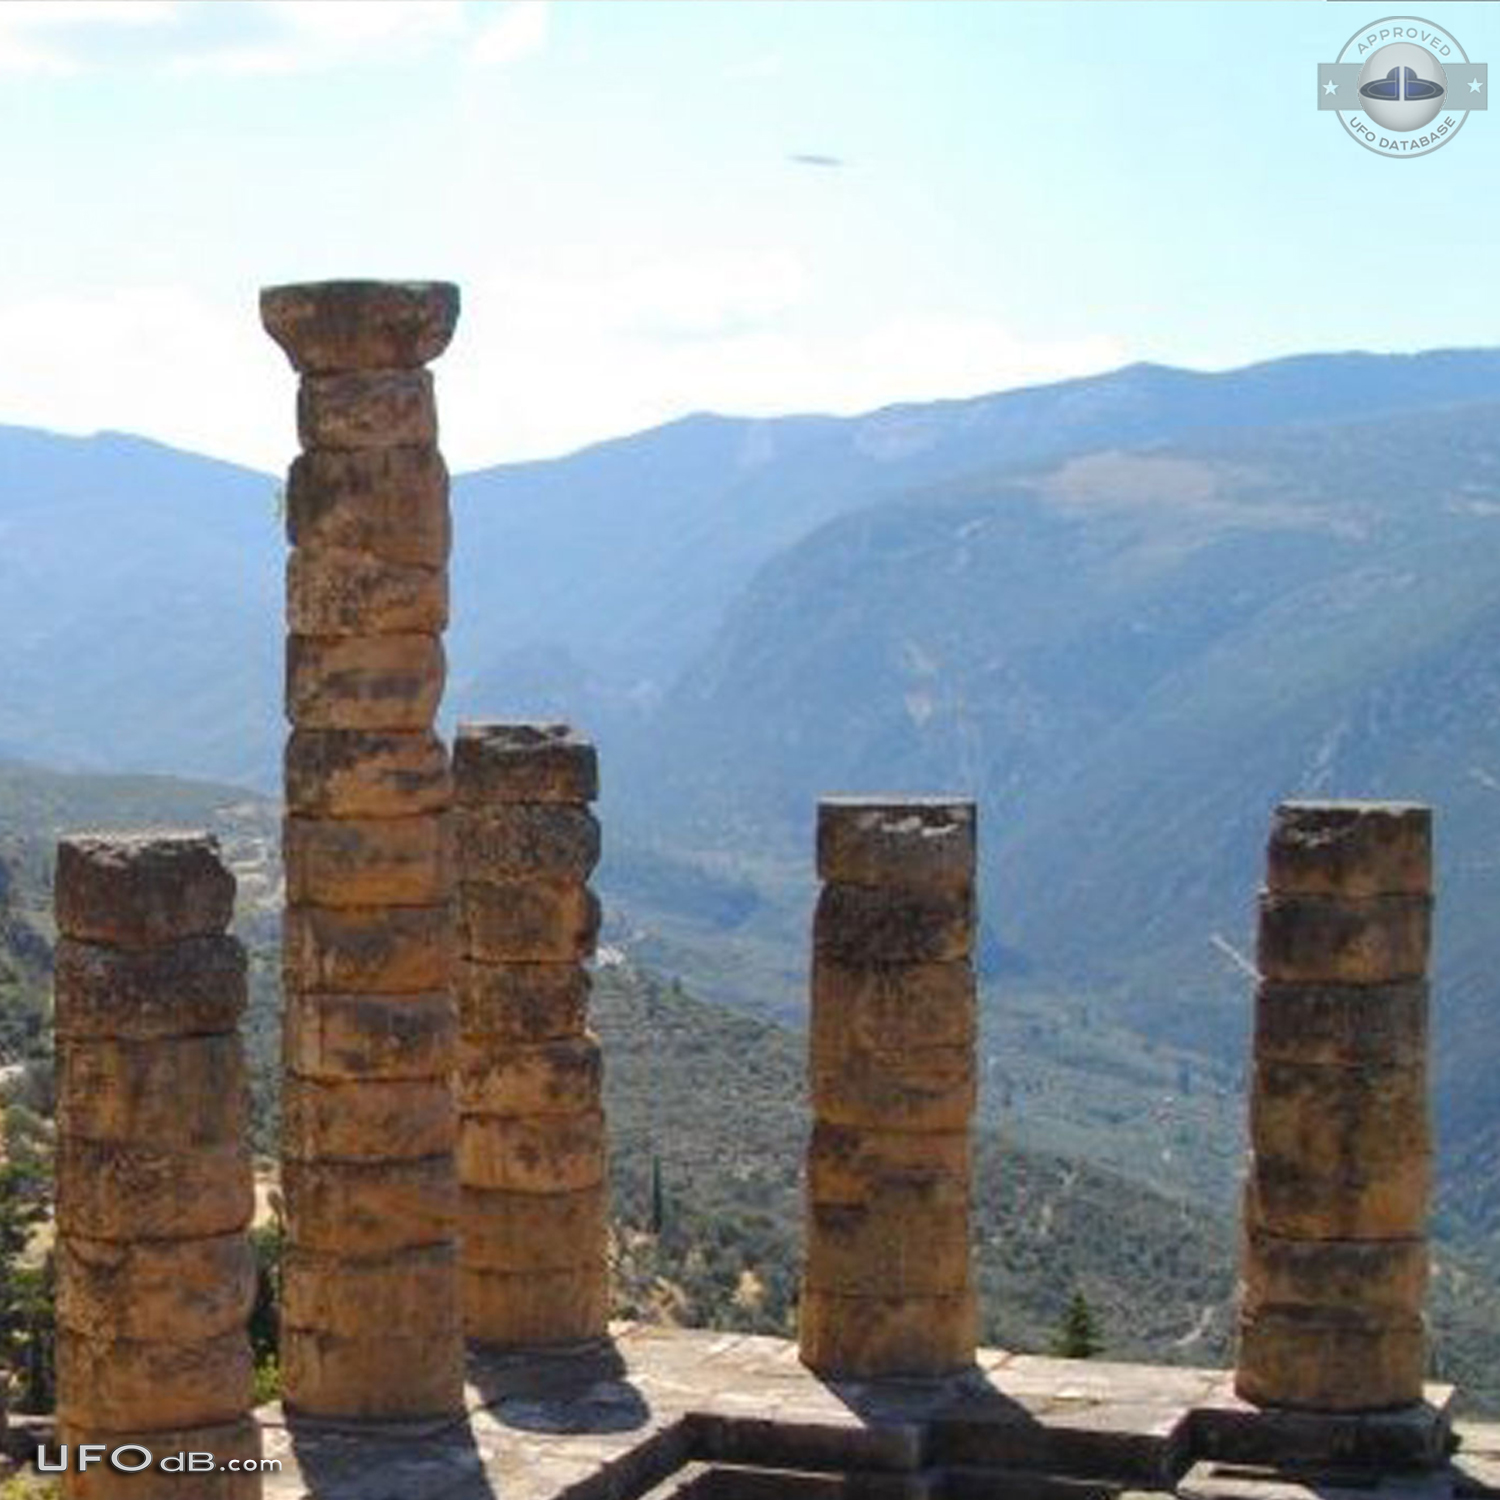 UFO picture showing saucer near Delphi Greece caught in June 3 2012 UFO Picture #449-2